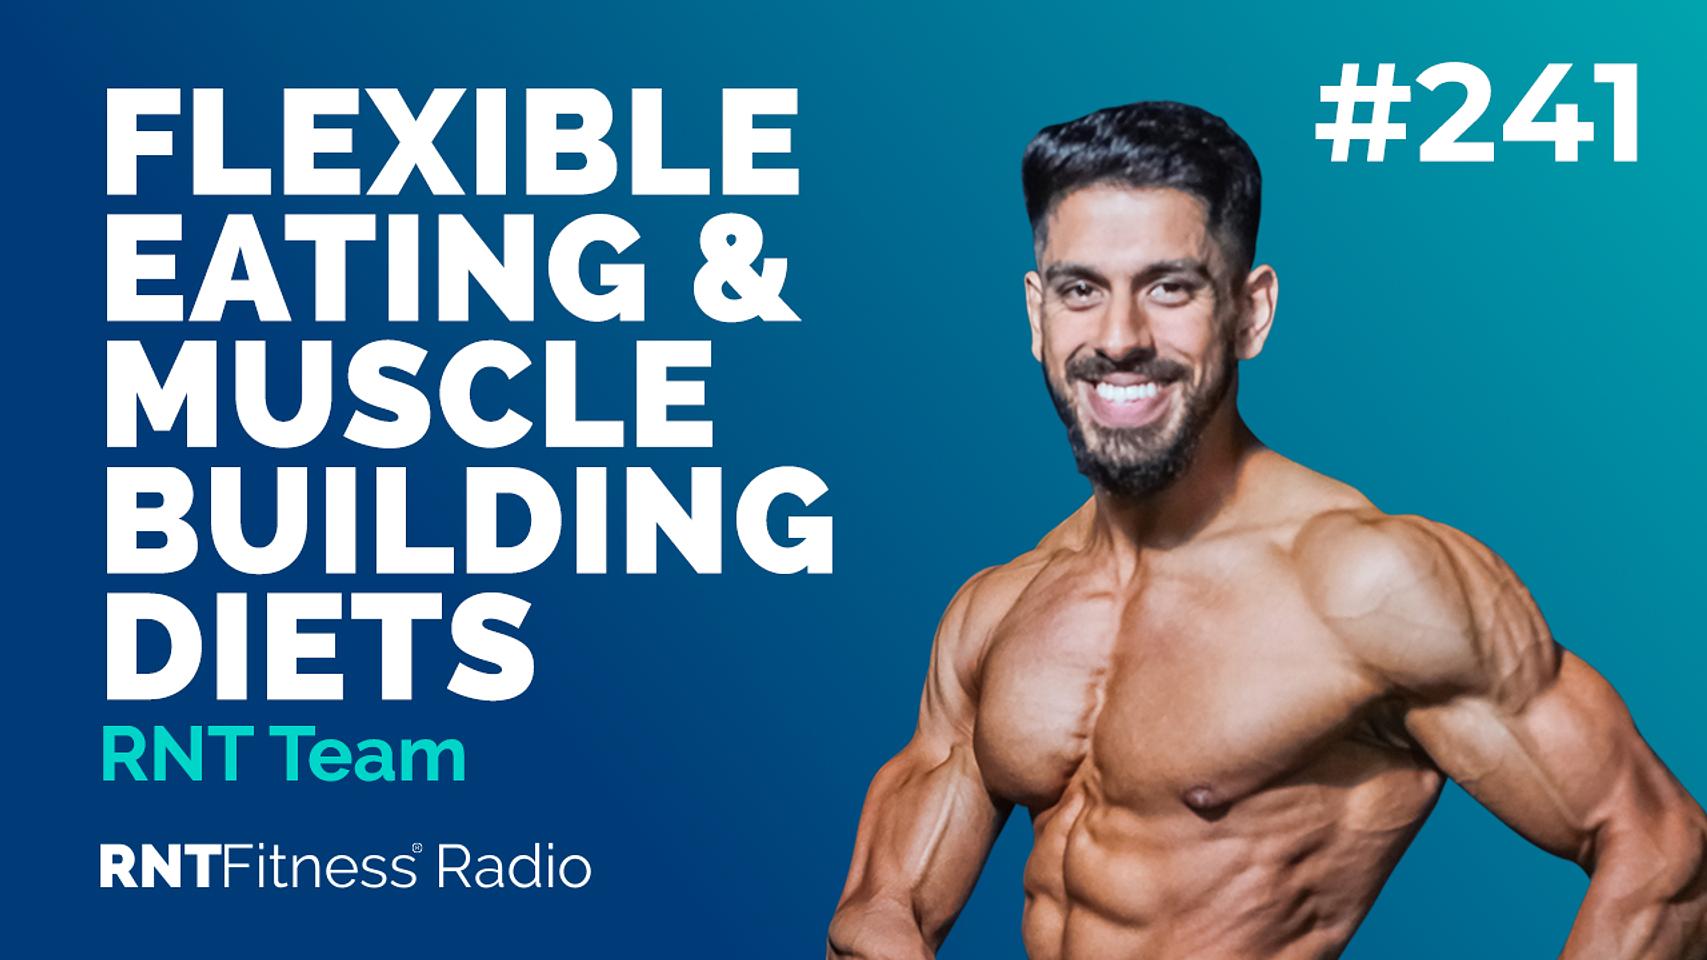 Ep. 241 - Flexible Eating & Muscle Building Diets